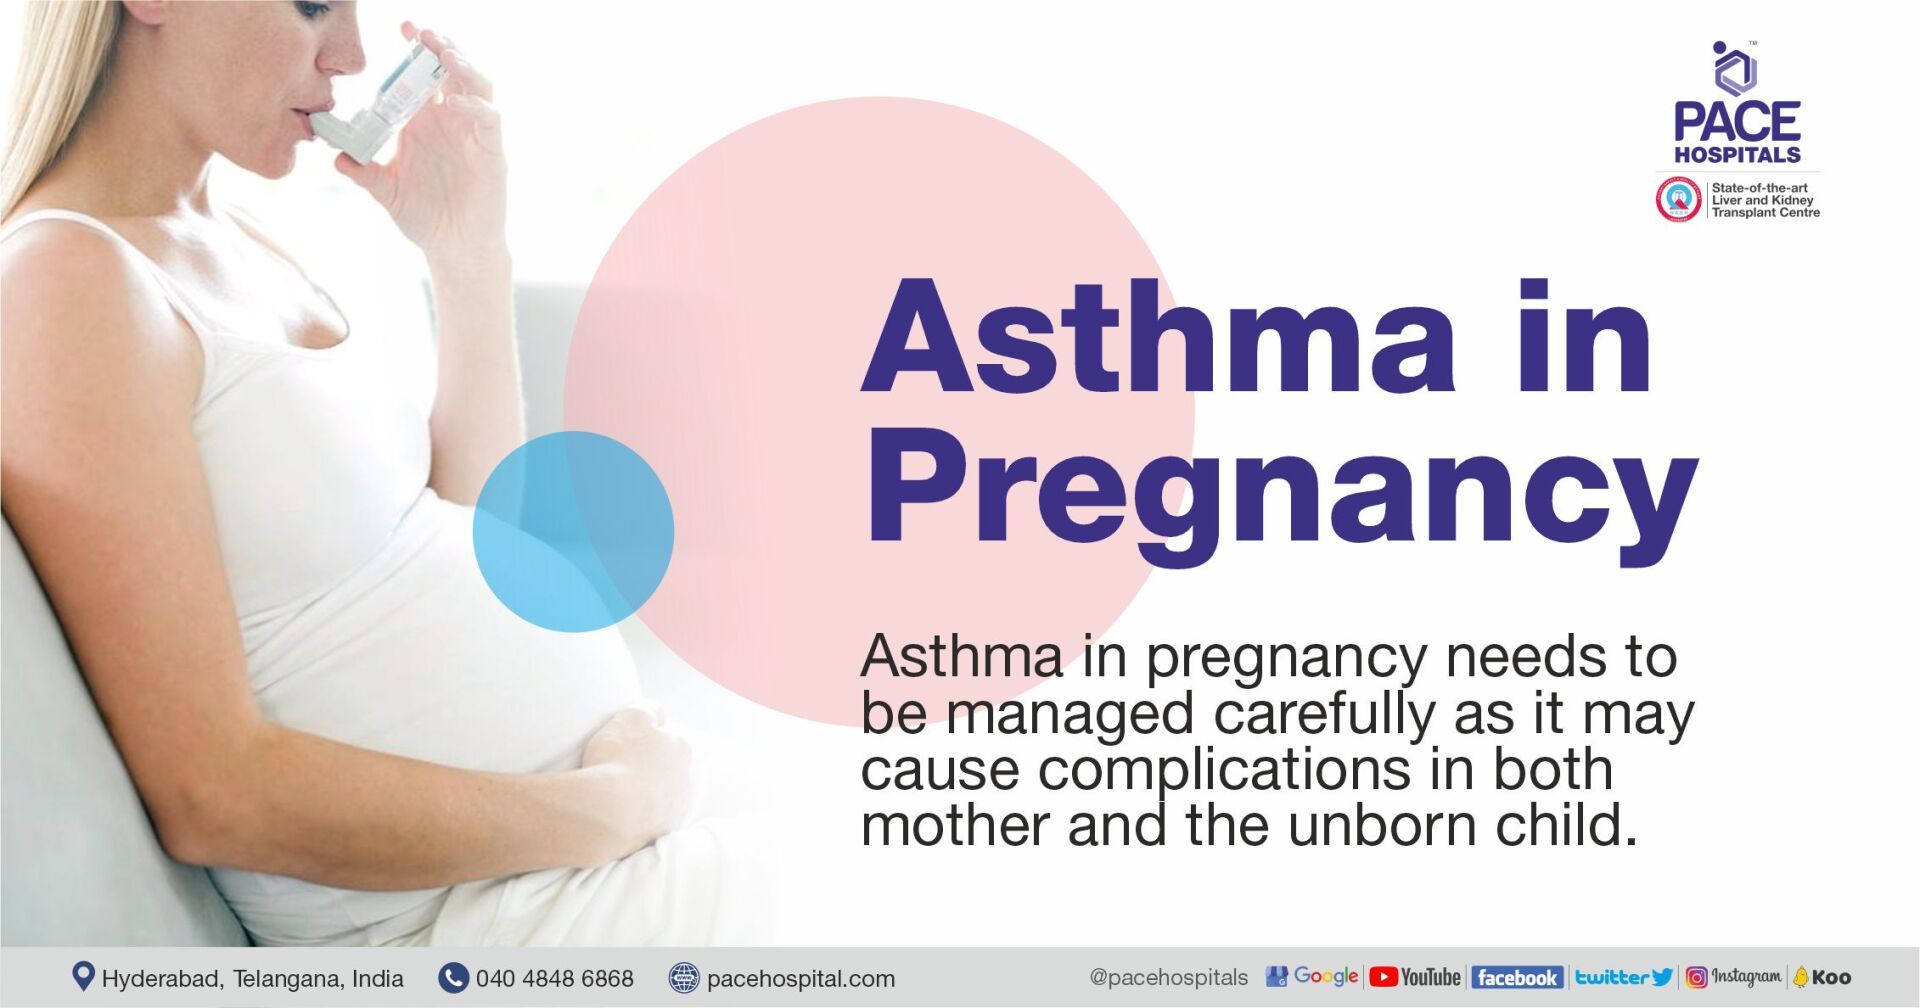 Management of Asthma in Pregnancy: Causes, Symptoms and Treatment